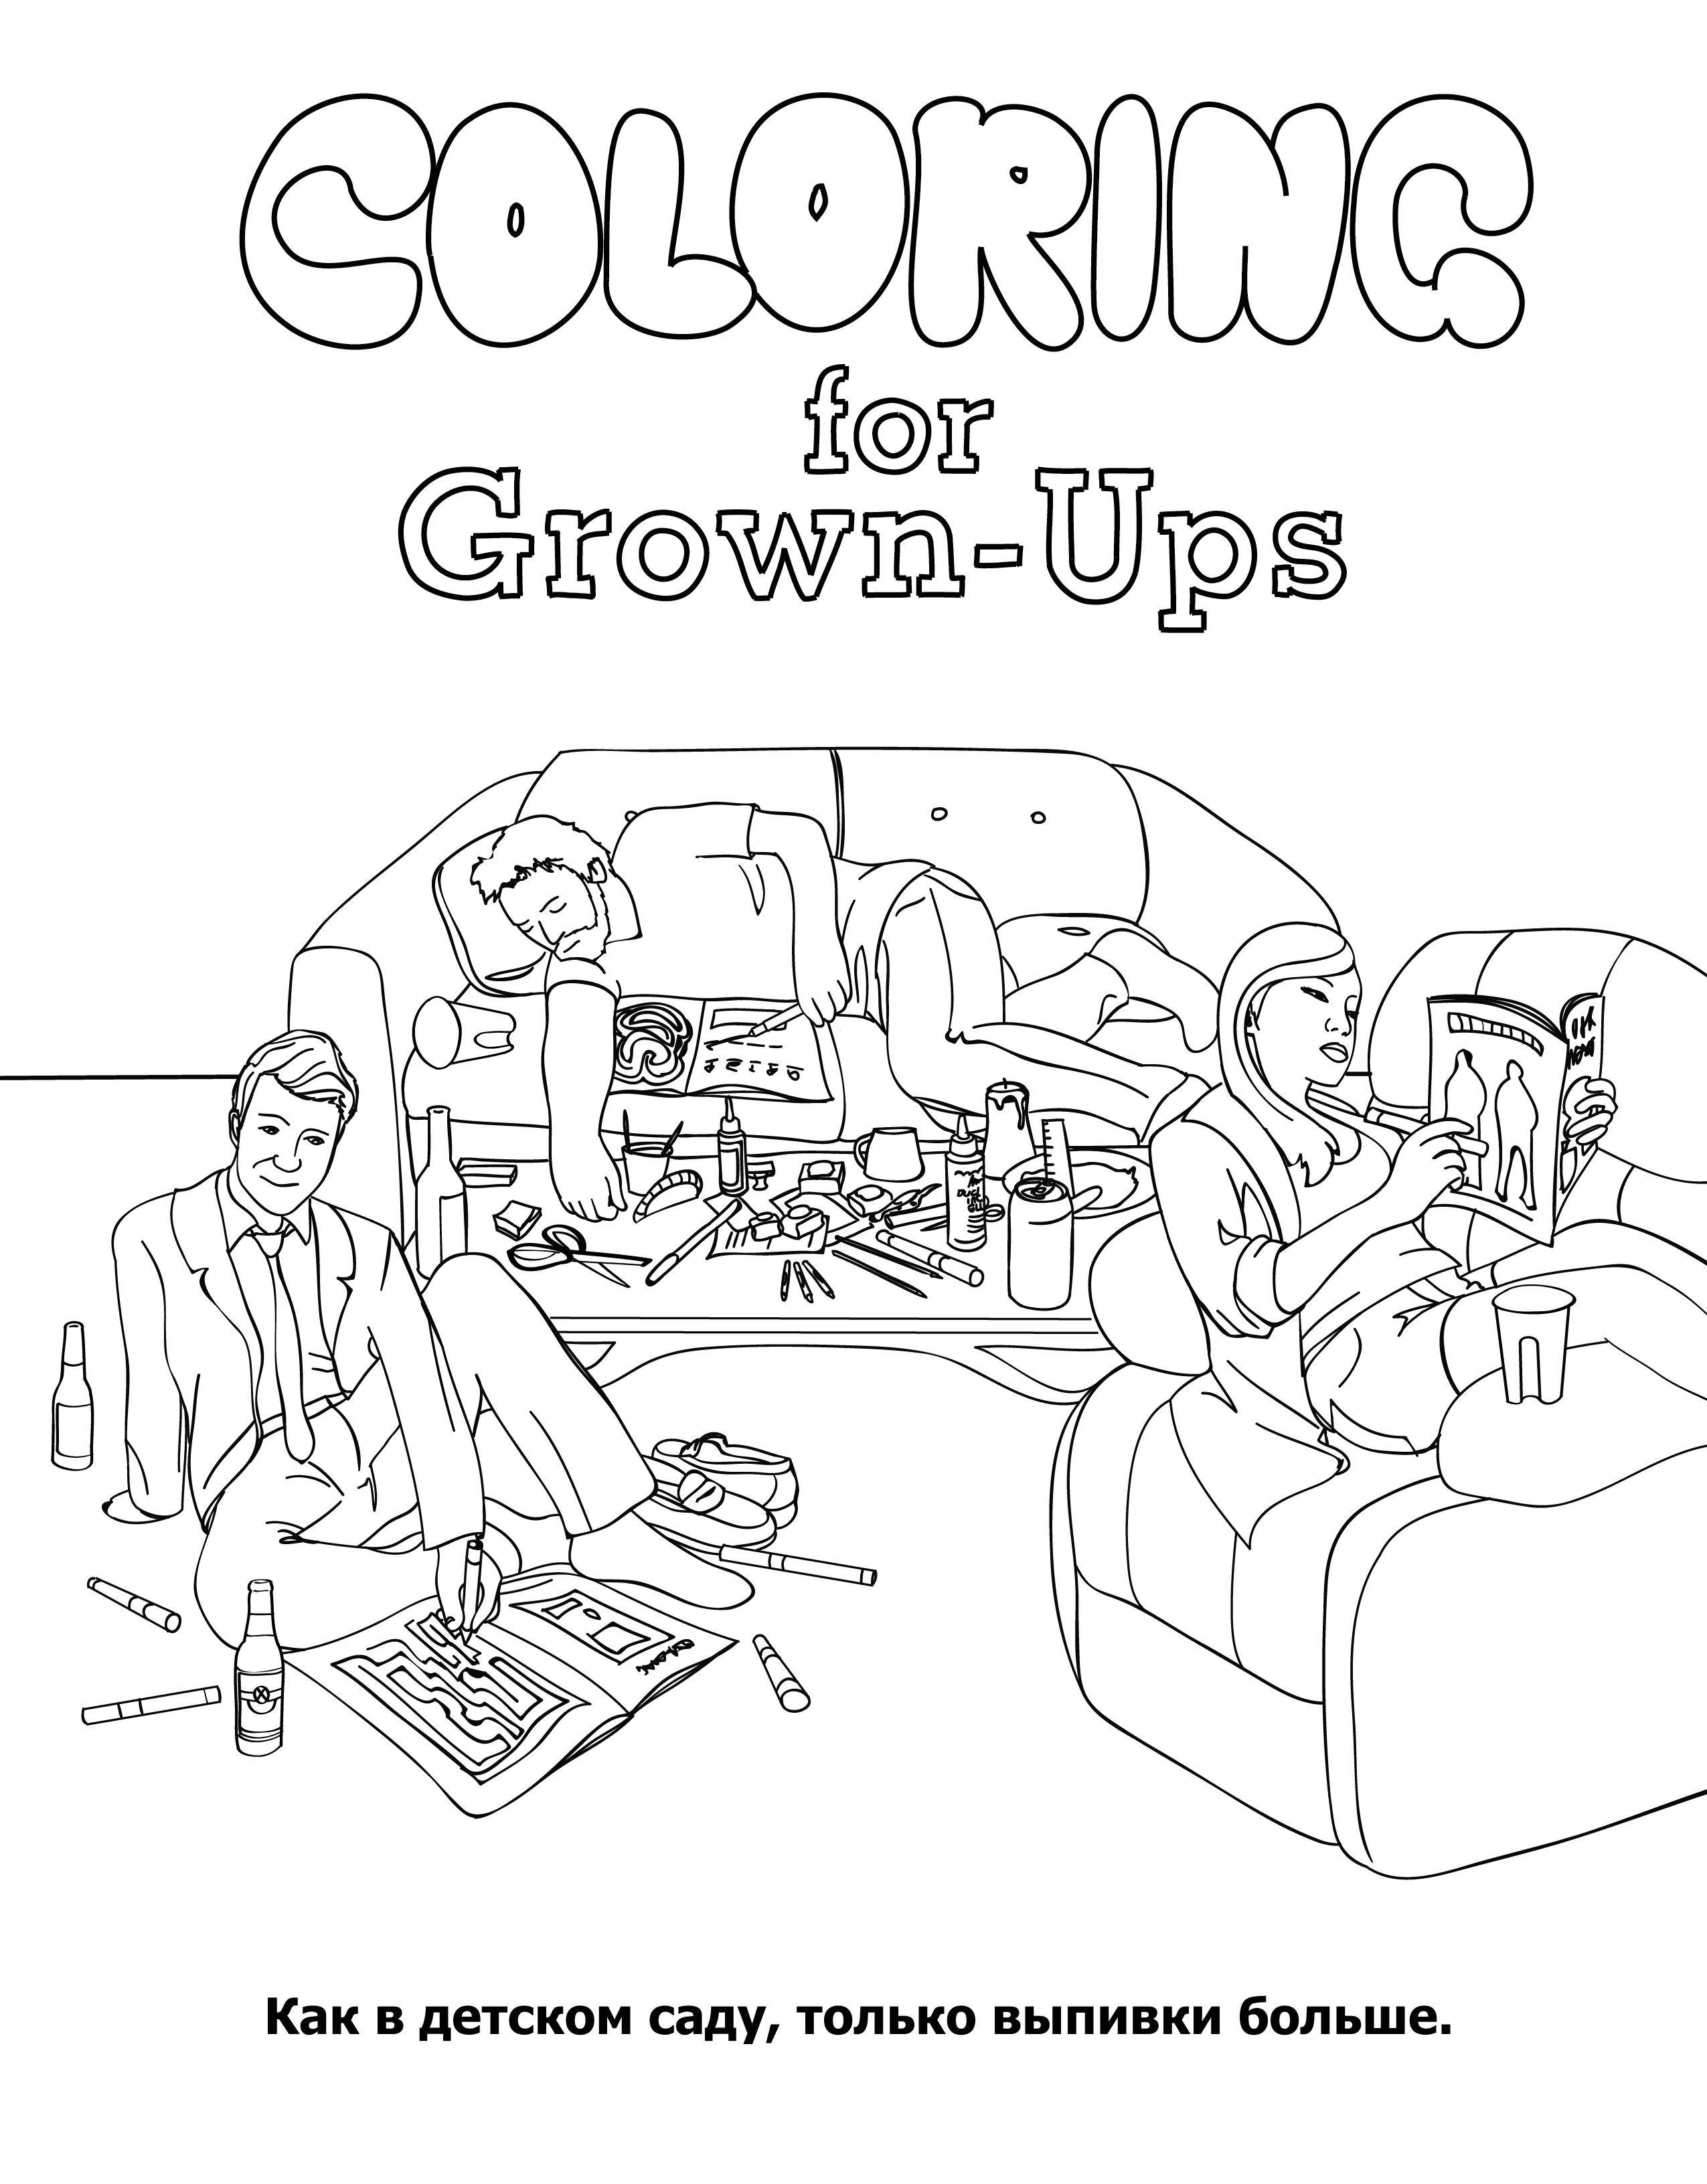 Coloring Use your imagination. Category coloring for adults. Tags:  Adult coloring pages.